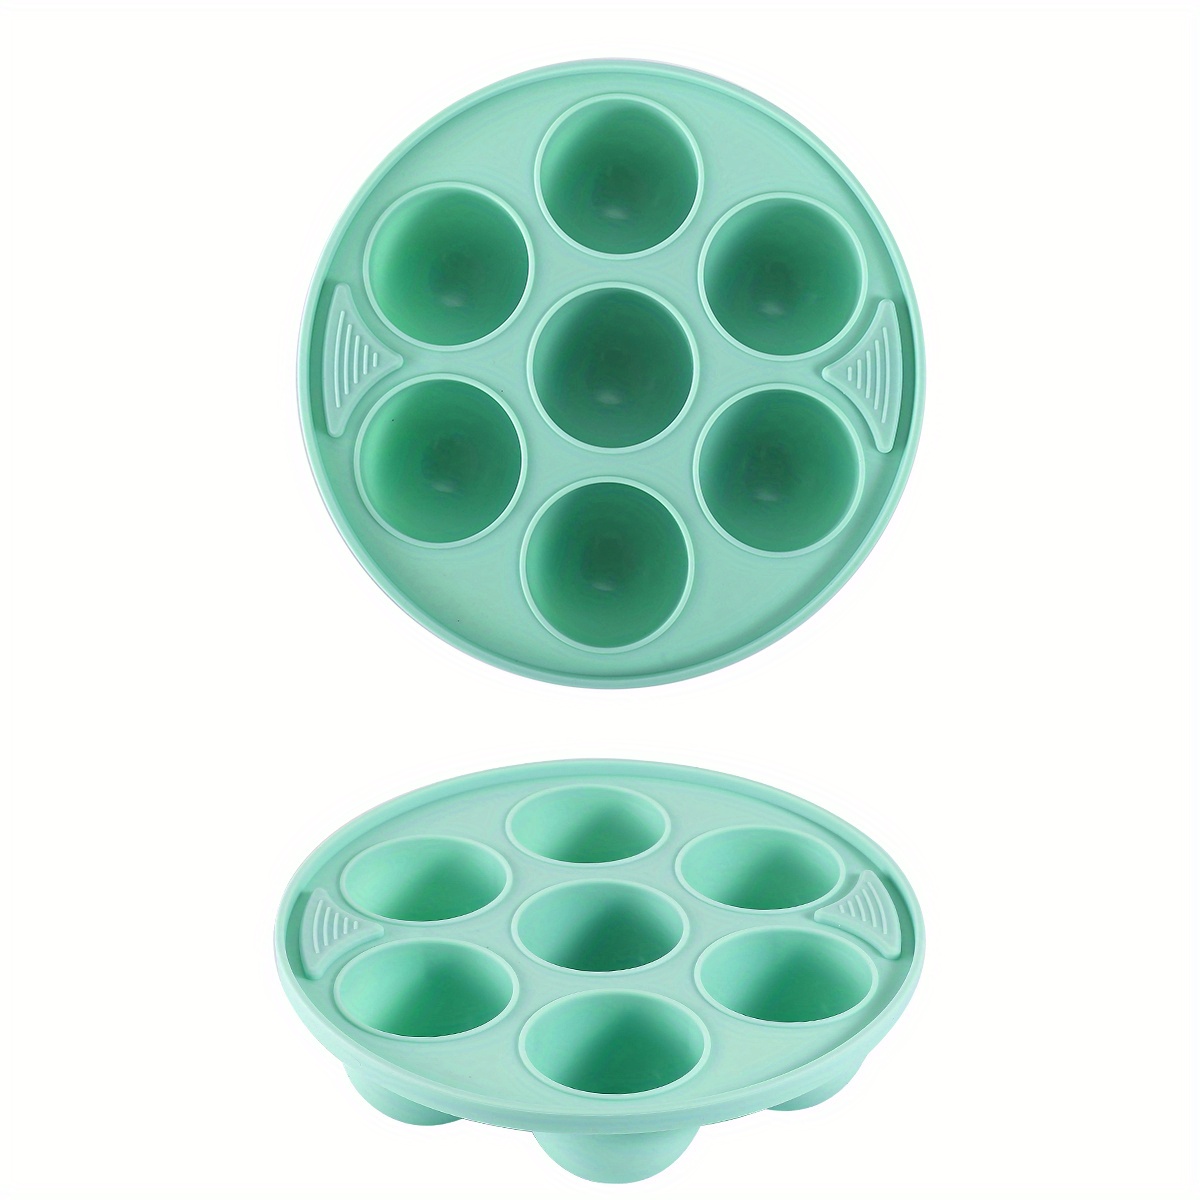 1pc, Silicone Muffin Molds, Cupcake Mold Pressure Cooker, Sous Vide Egg  Bite Maker, Air Fryer Liners, Air Fryer Accessories, Baking Tools, Kitchen  Gadgets, Kitchen Accessories, Home Kitchen Items